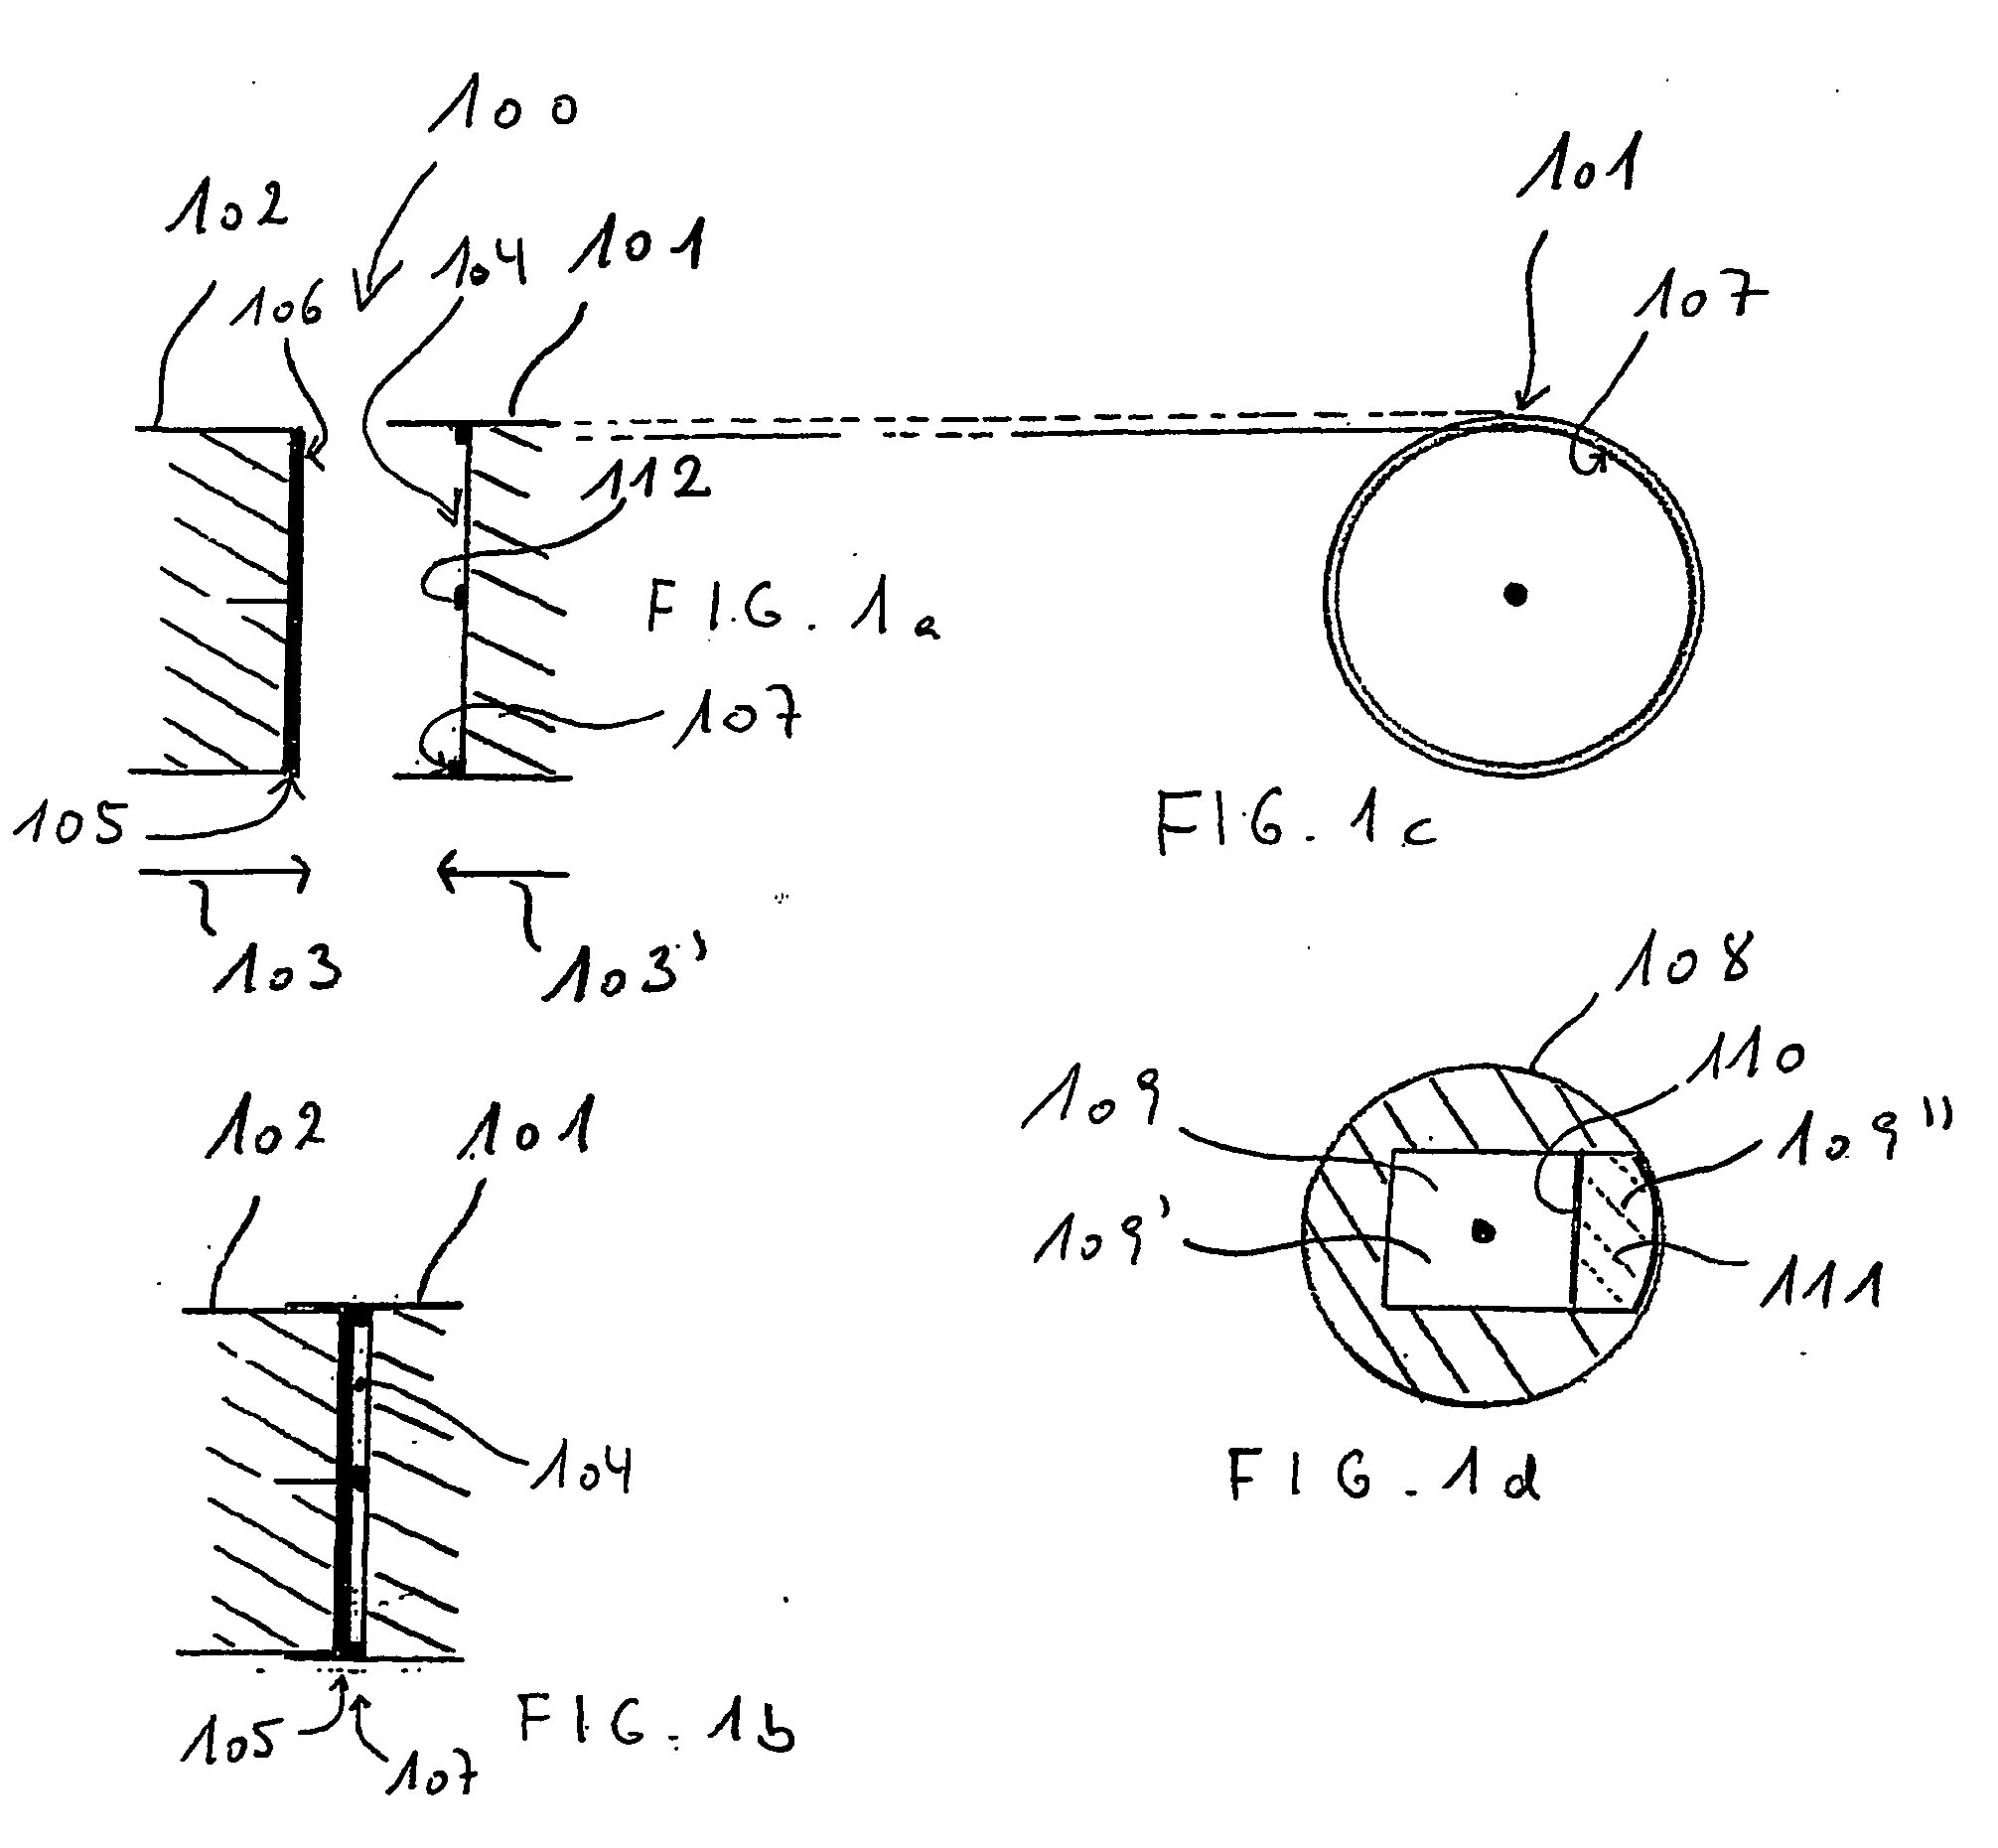 Method for production of an optical disc with a detachable module